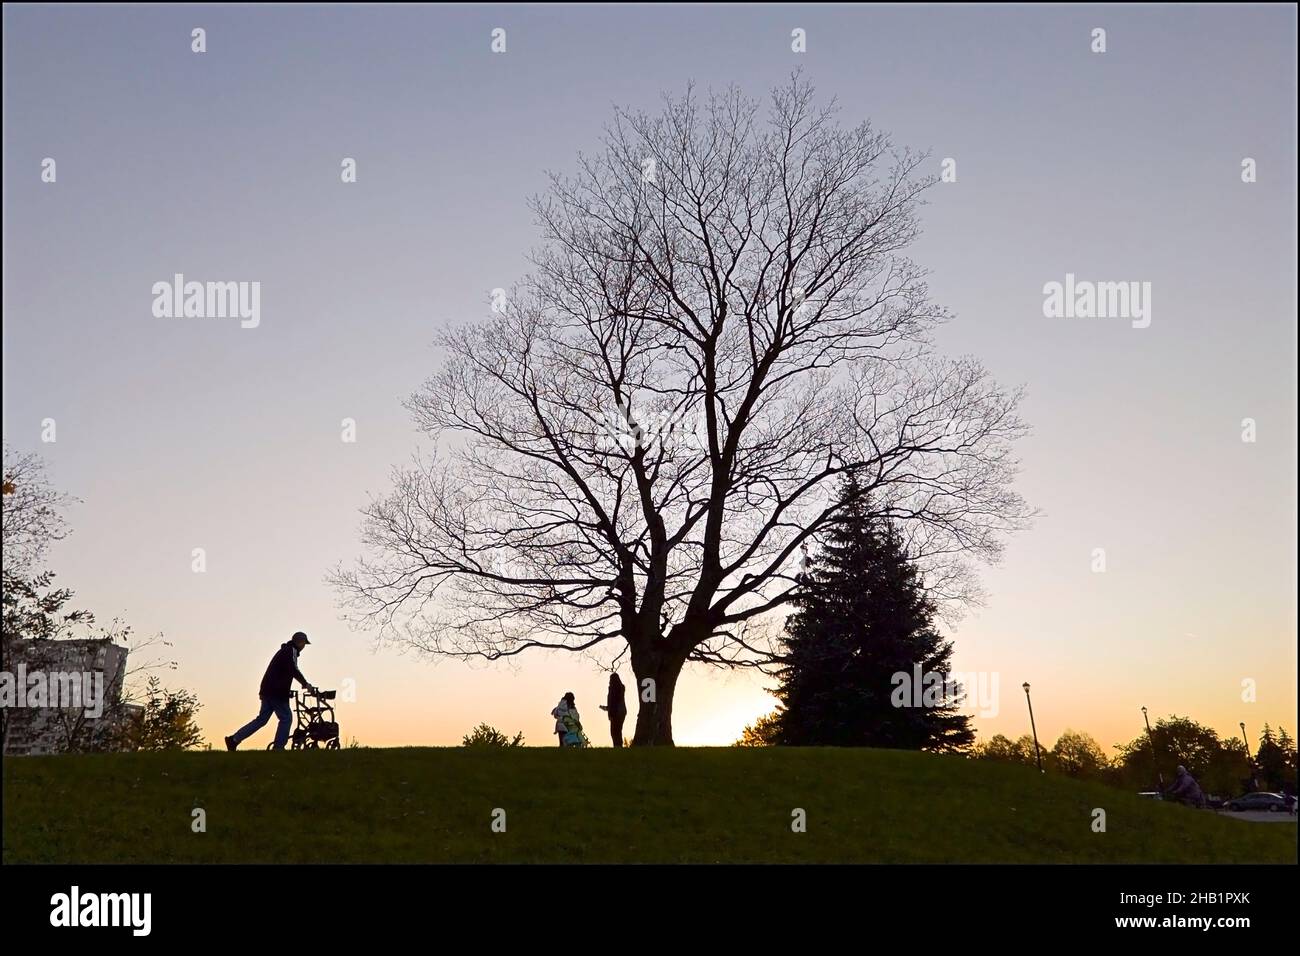 Silhouette of the father pushing the baby stroller in the park at sunset Stock Photo